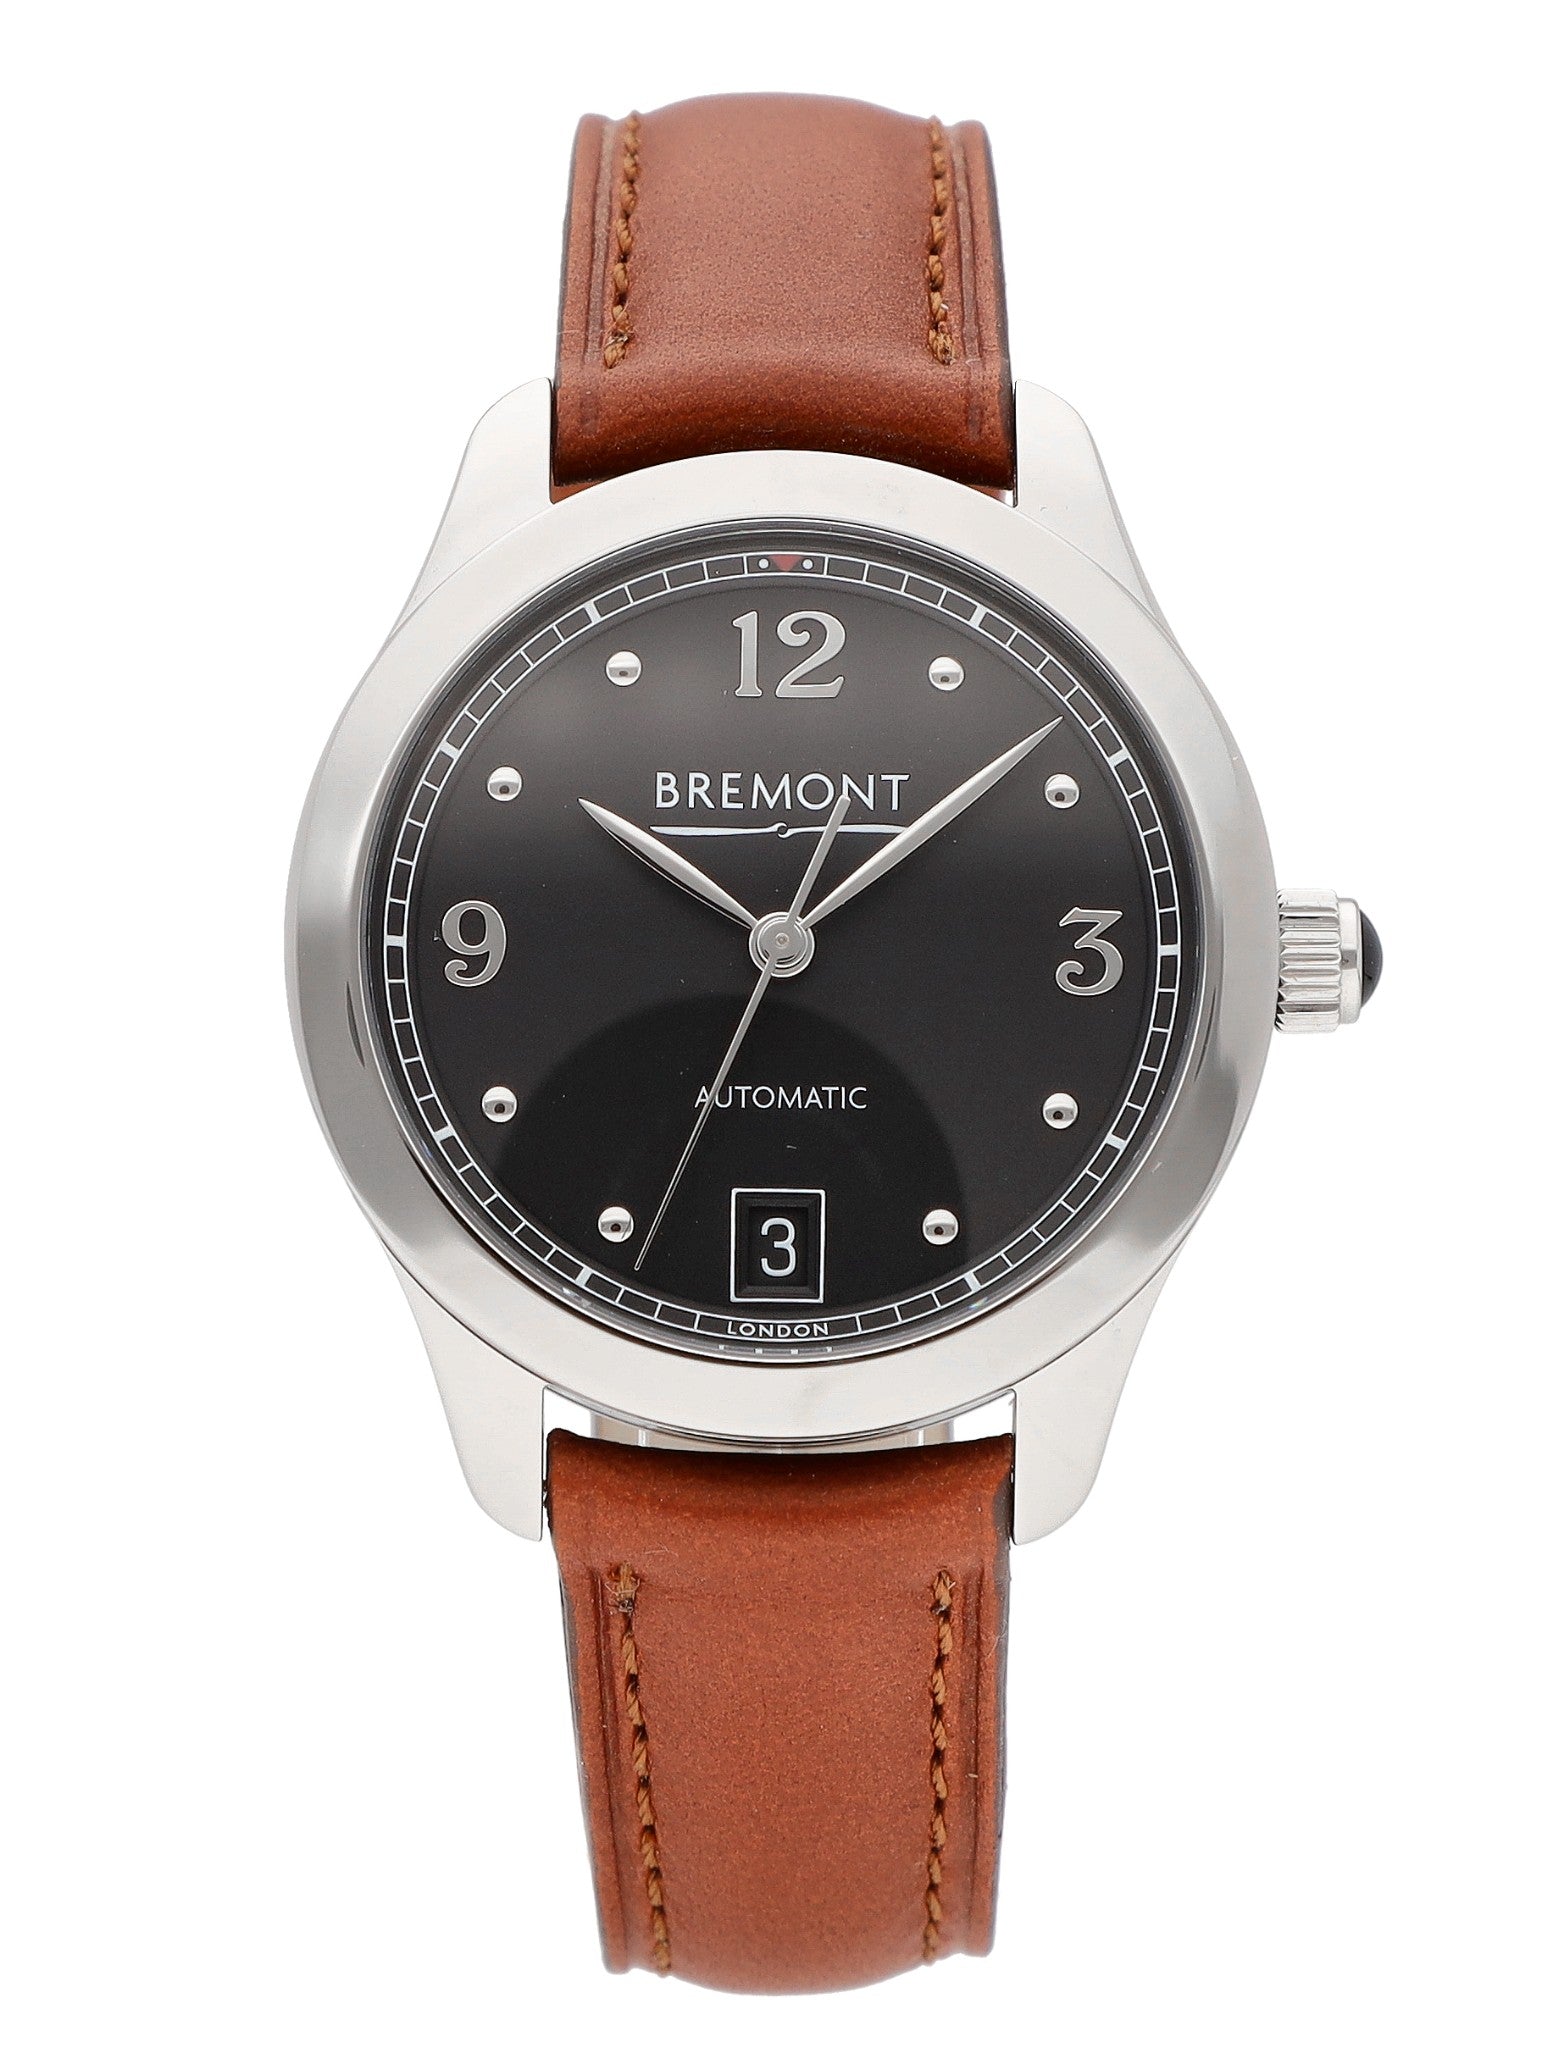 Store Display Bremont Solo 34 Automatic Ladies Stainless Steel 34mm Watch SOLO34-AJ-BK-R-S $999